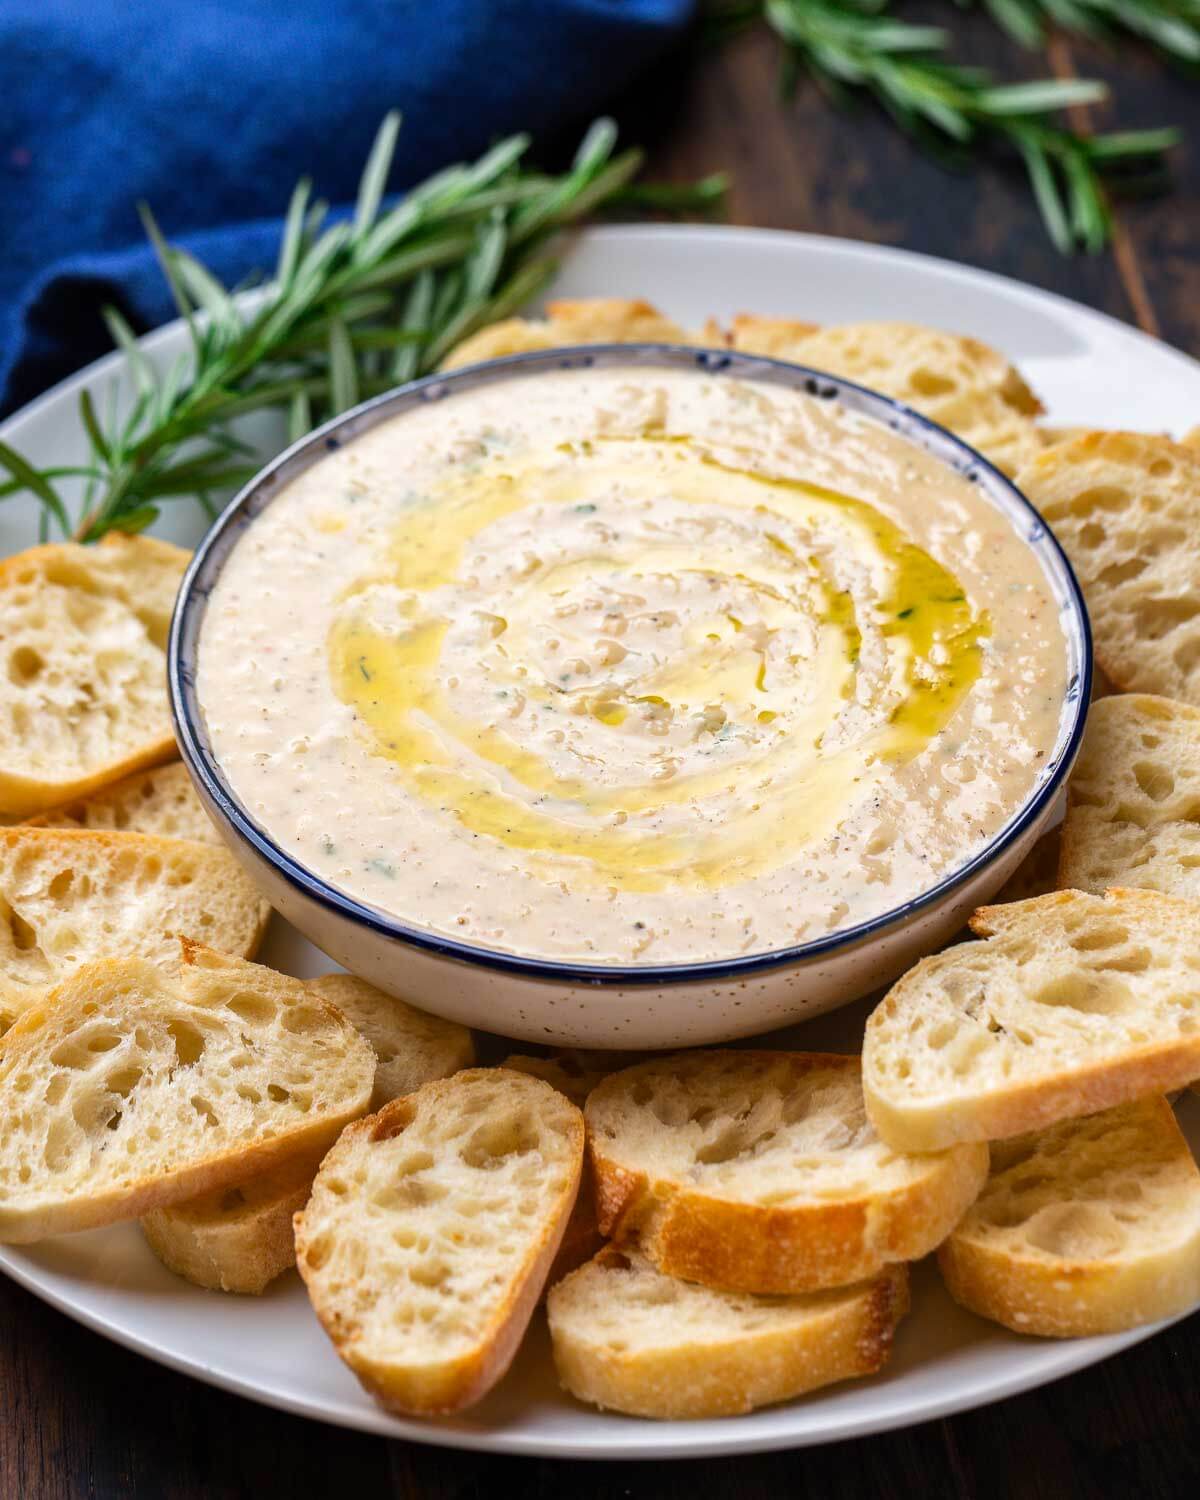 Bowl of cannellini bean dip with crostini and rosemary garnish.